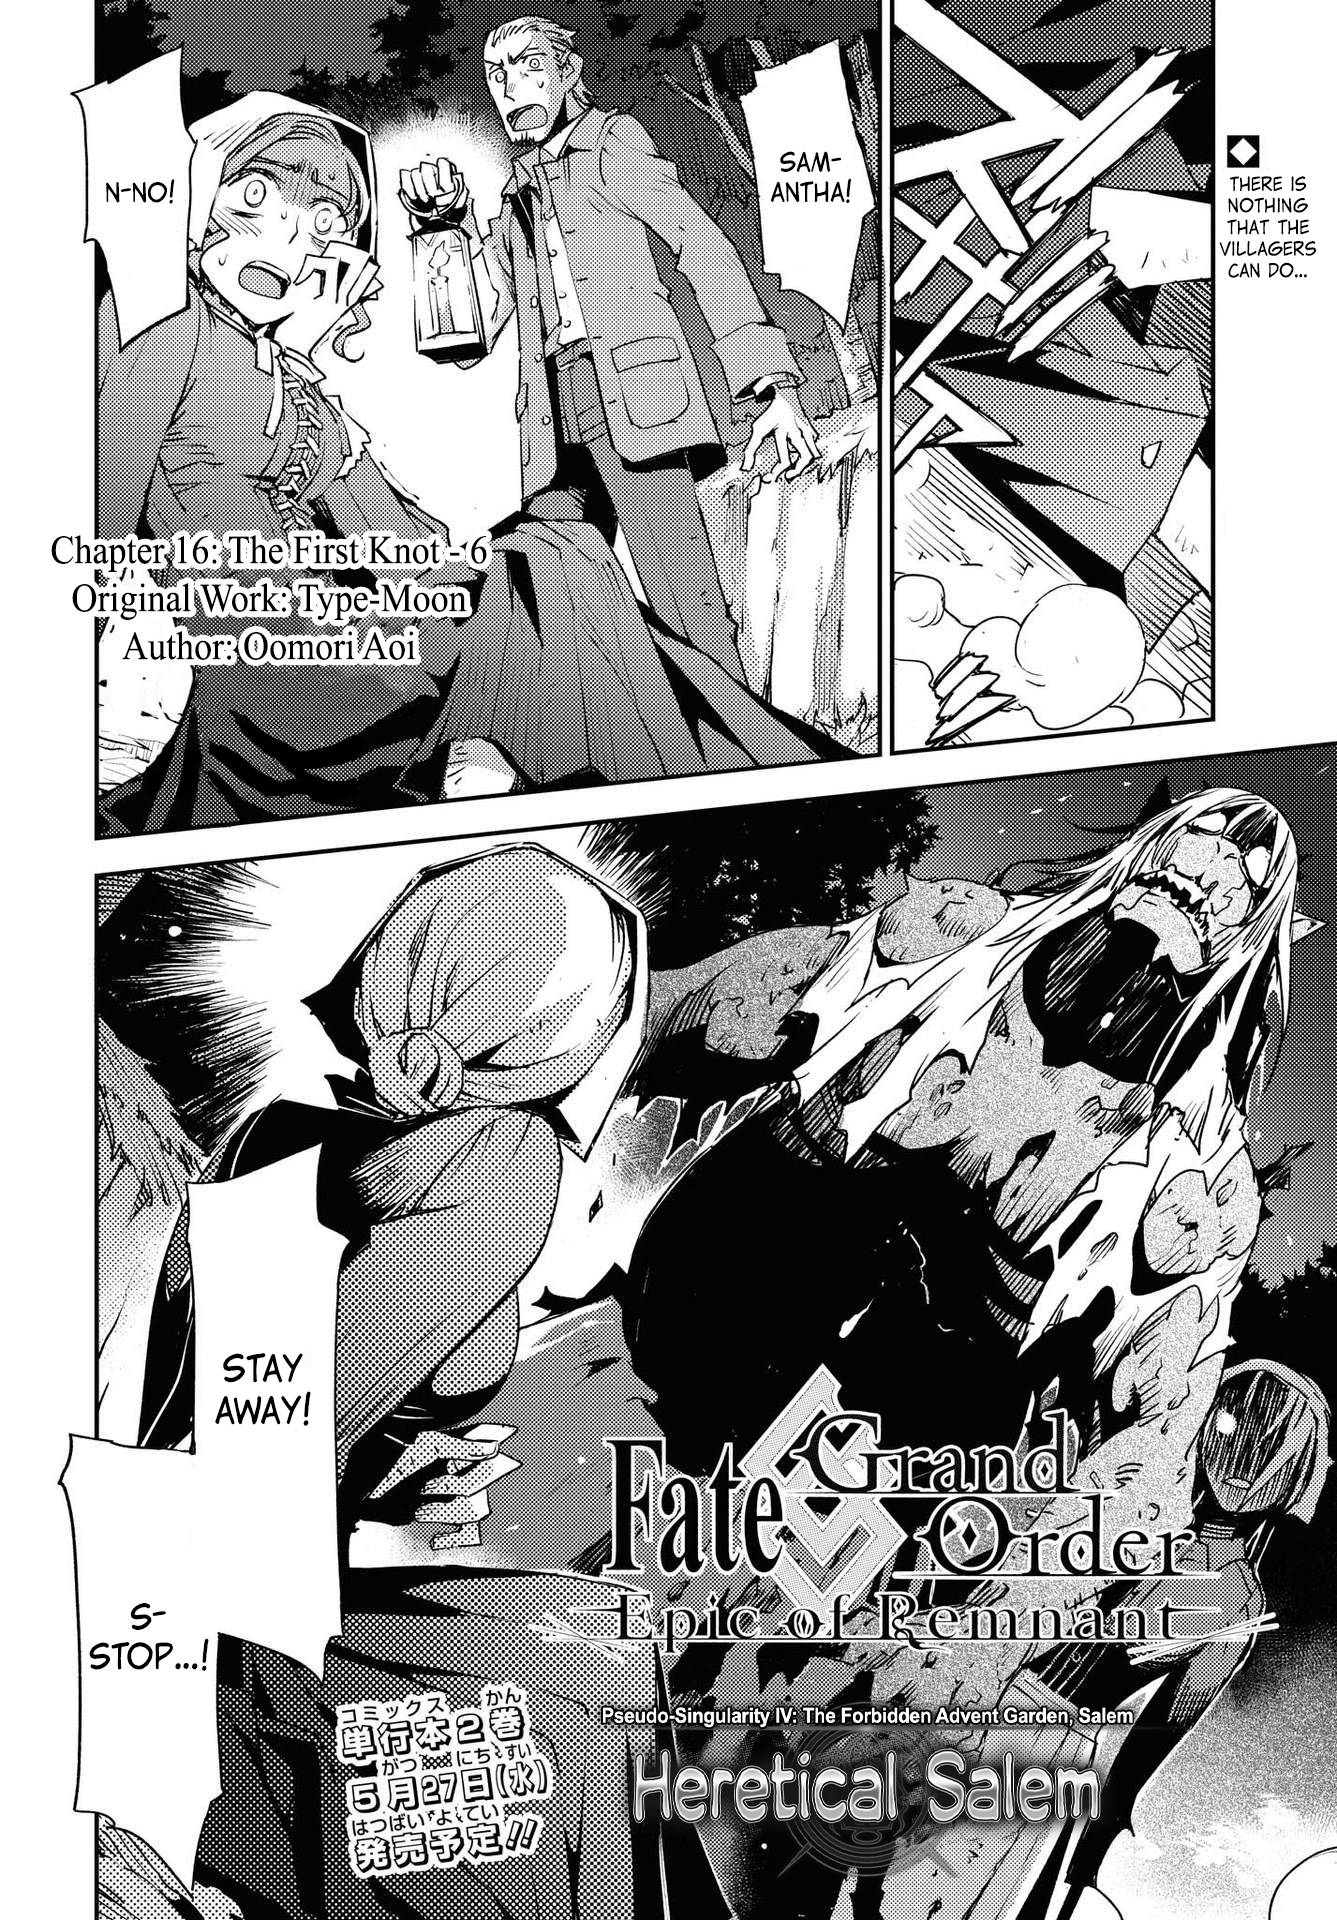 Fate/Grand Order: Epic of Remnant - Subspecies Singularity IV: Taboo Advent Salem: Salem of Heresy - chapter 16 - #2